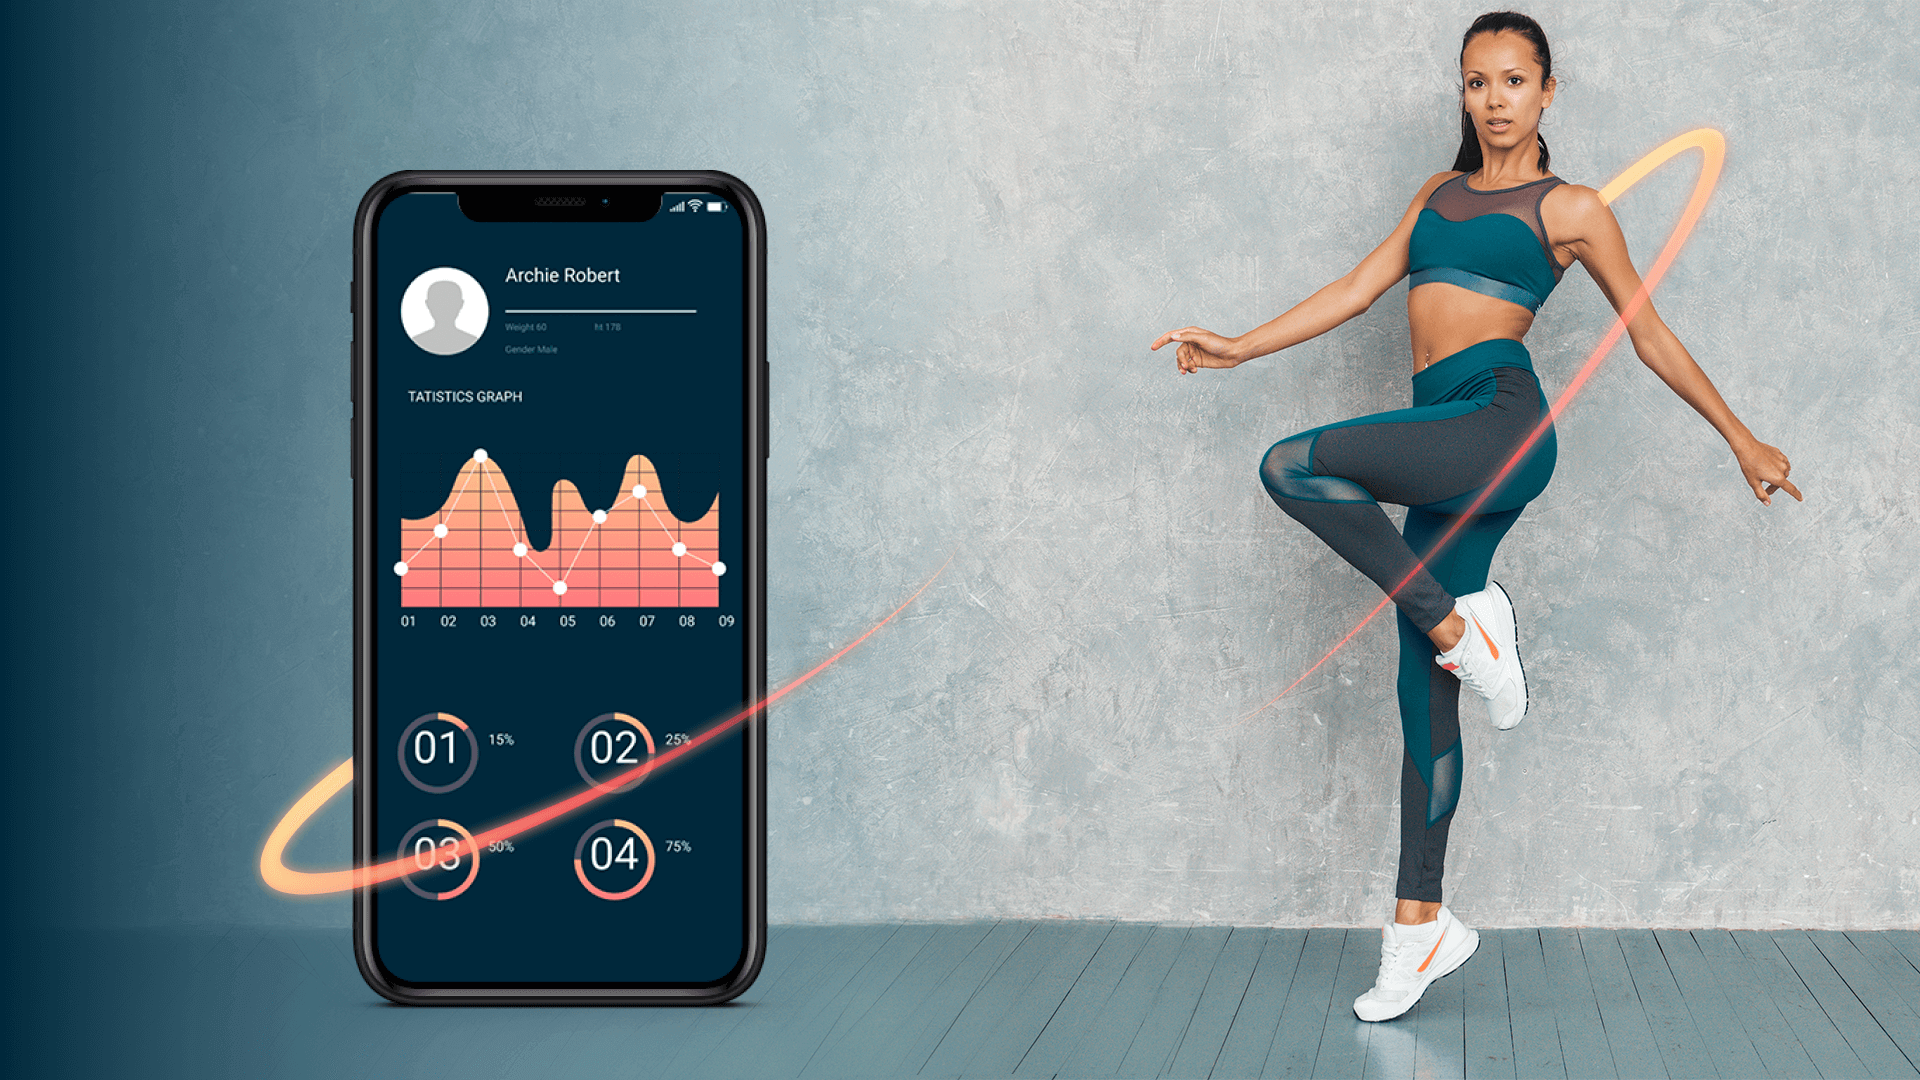 Knowing monetization strategies and choosing the proper one for your product is a significant part of how to develop a fitness app.